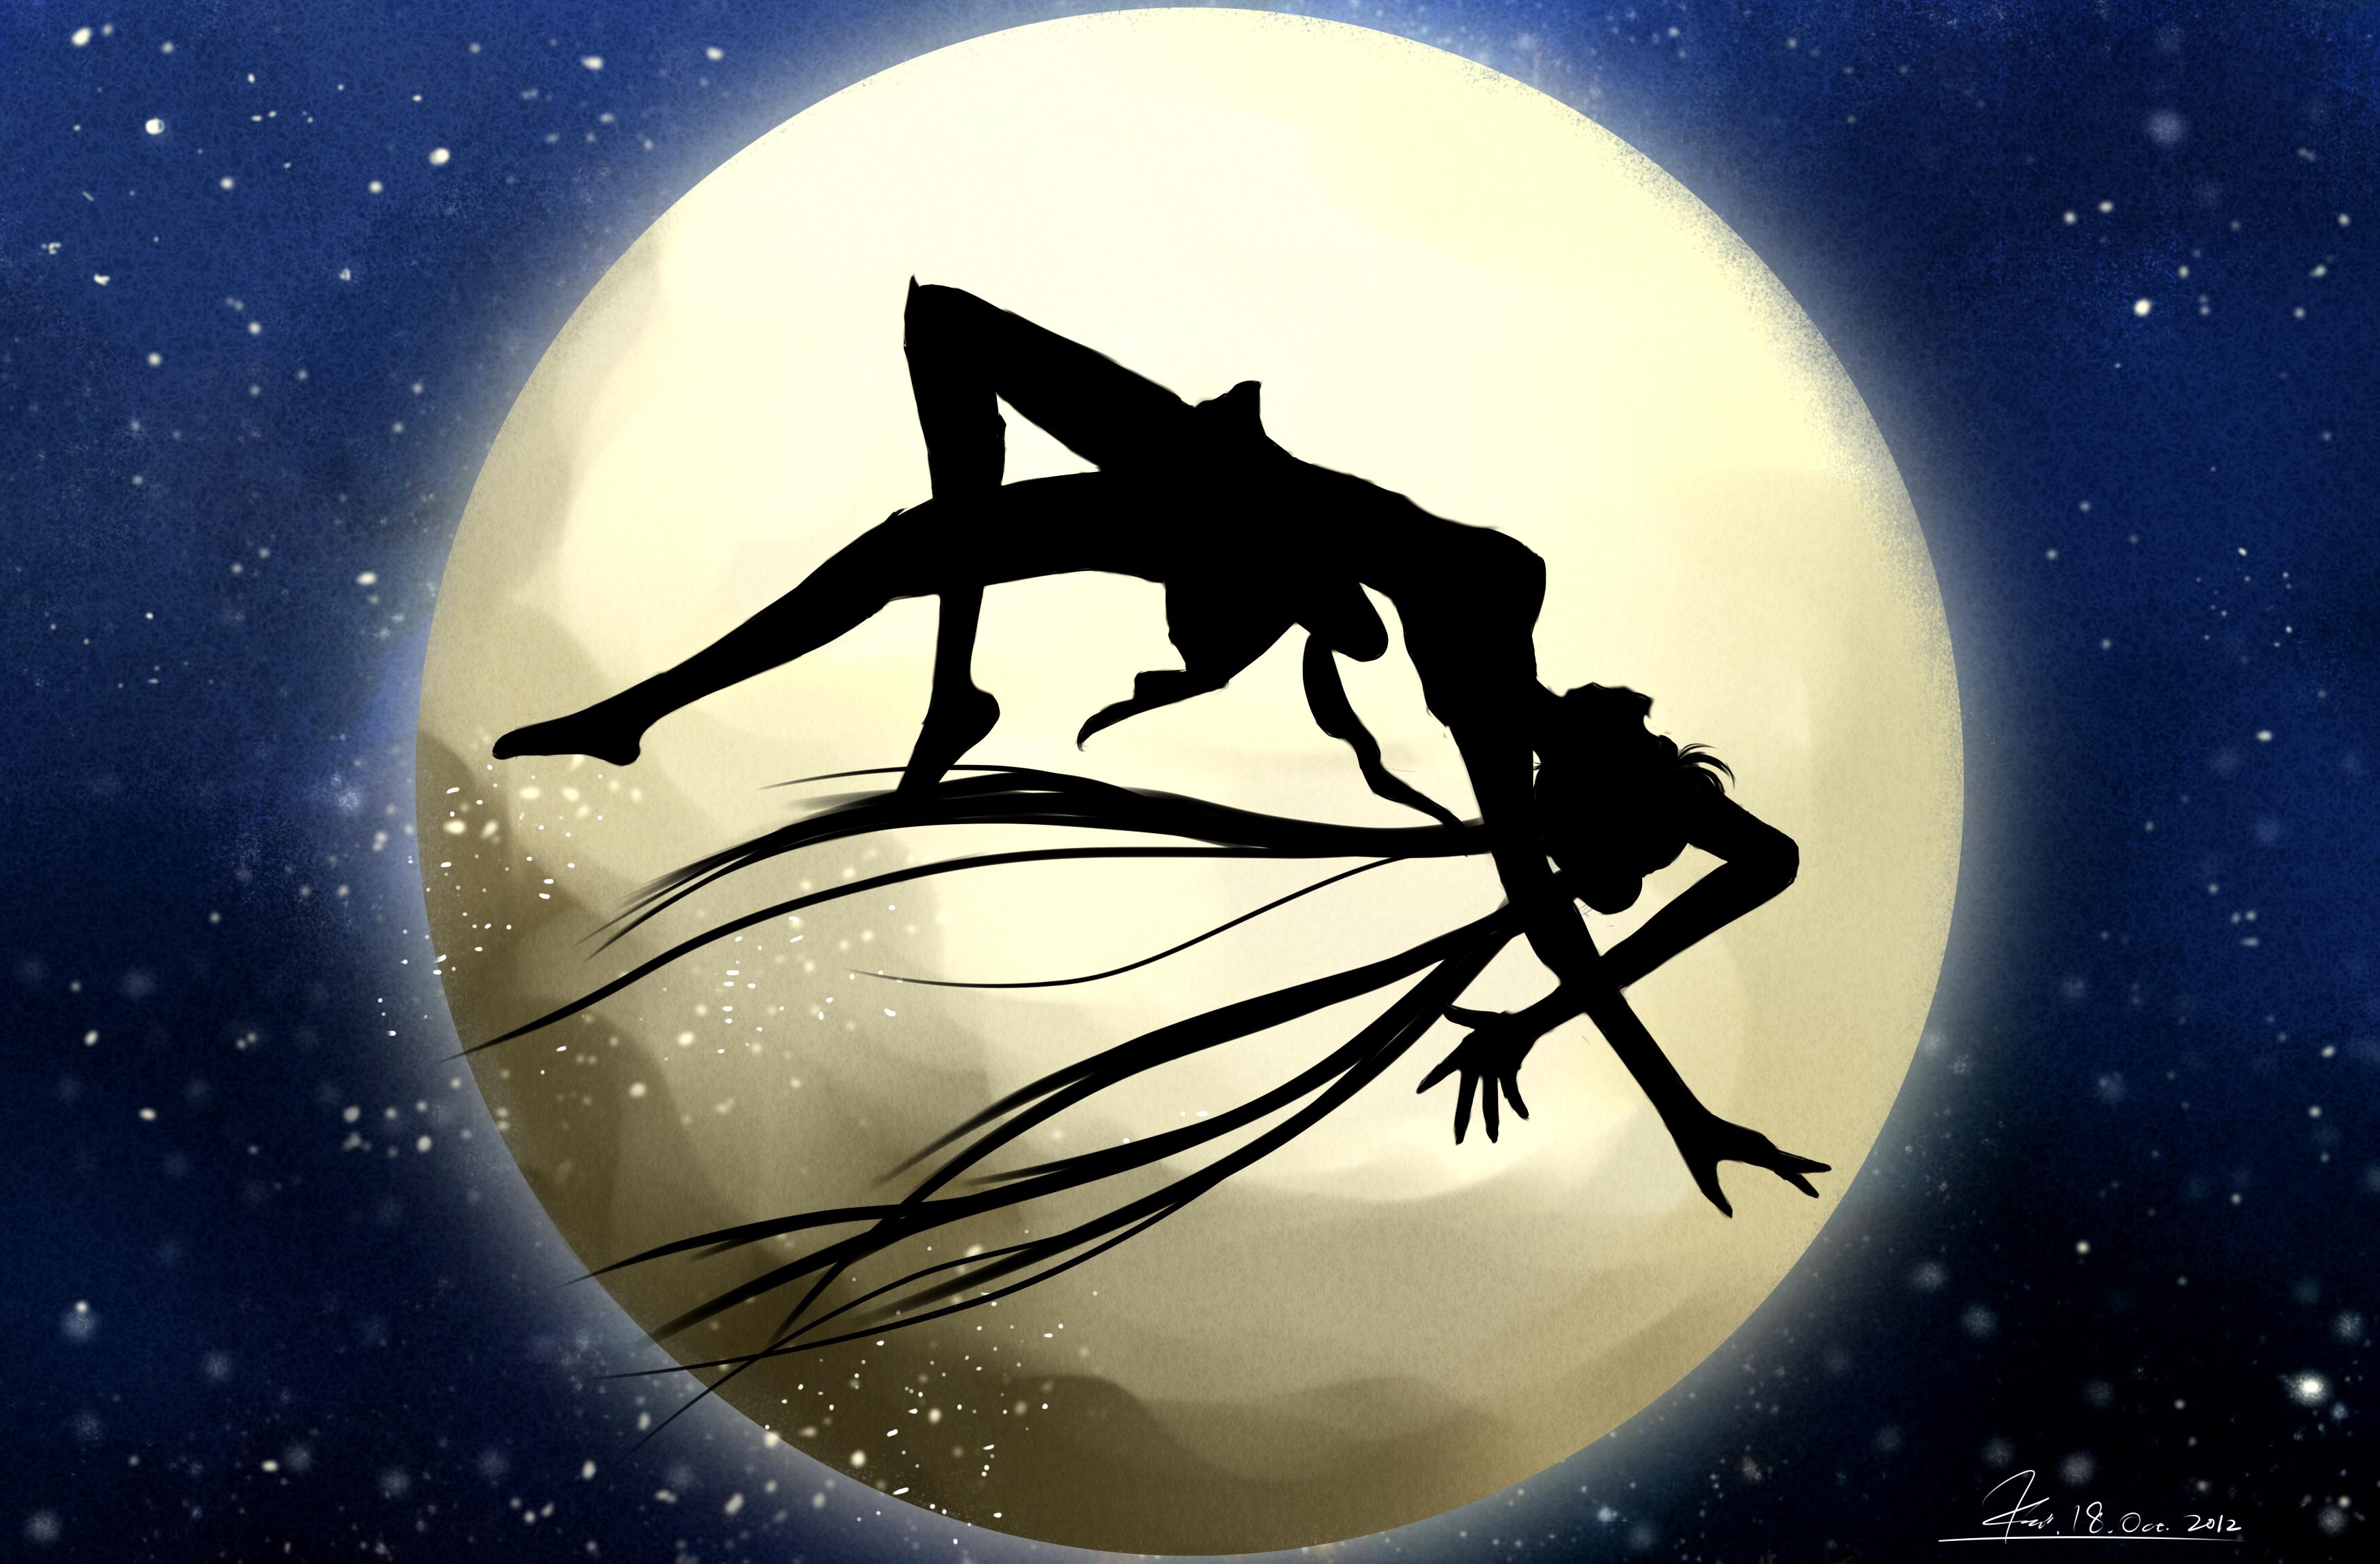 Fly Me to the Moon (Silhouette)插画图片壁纸